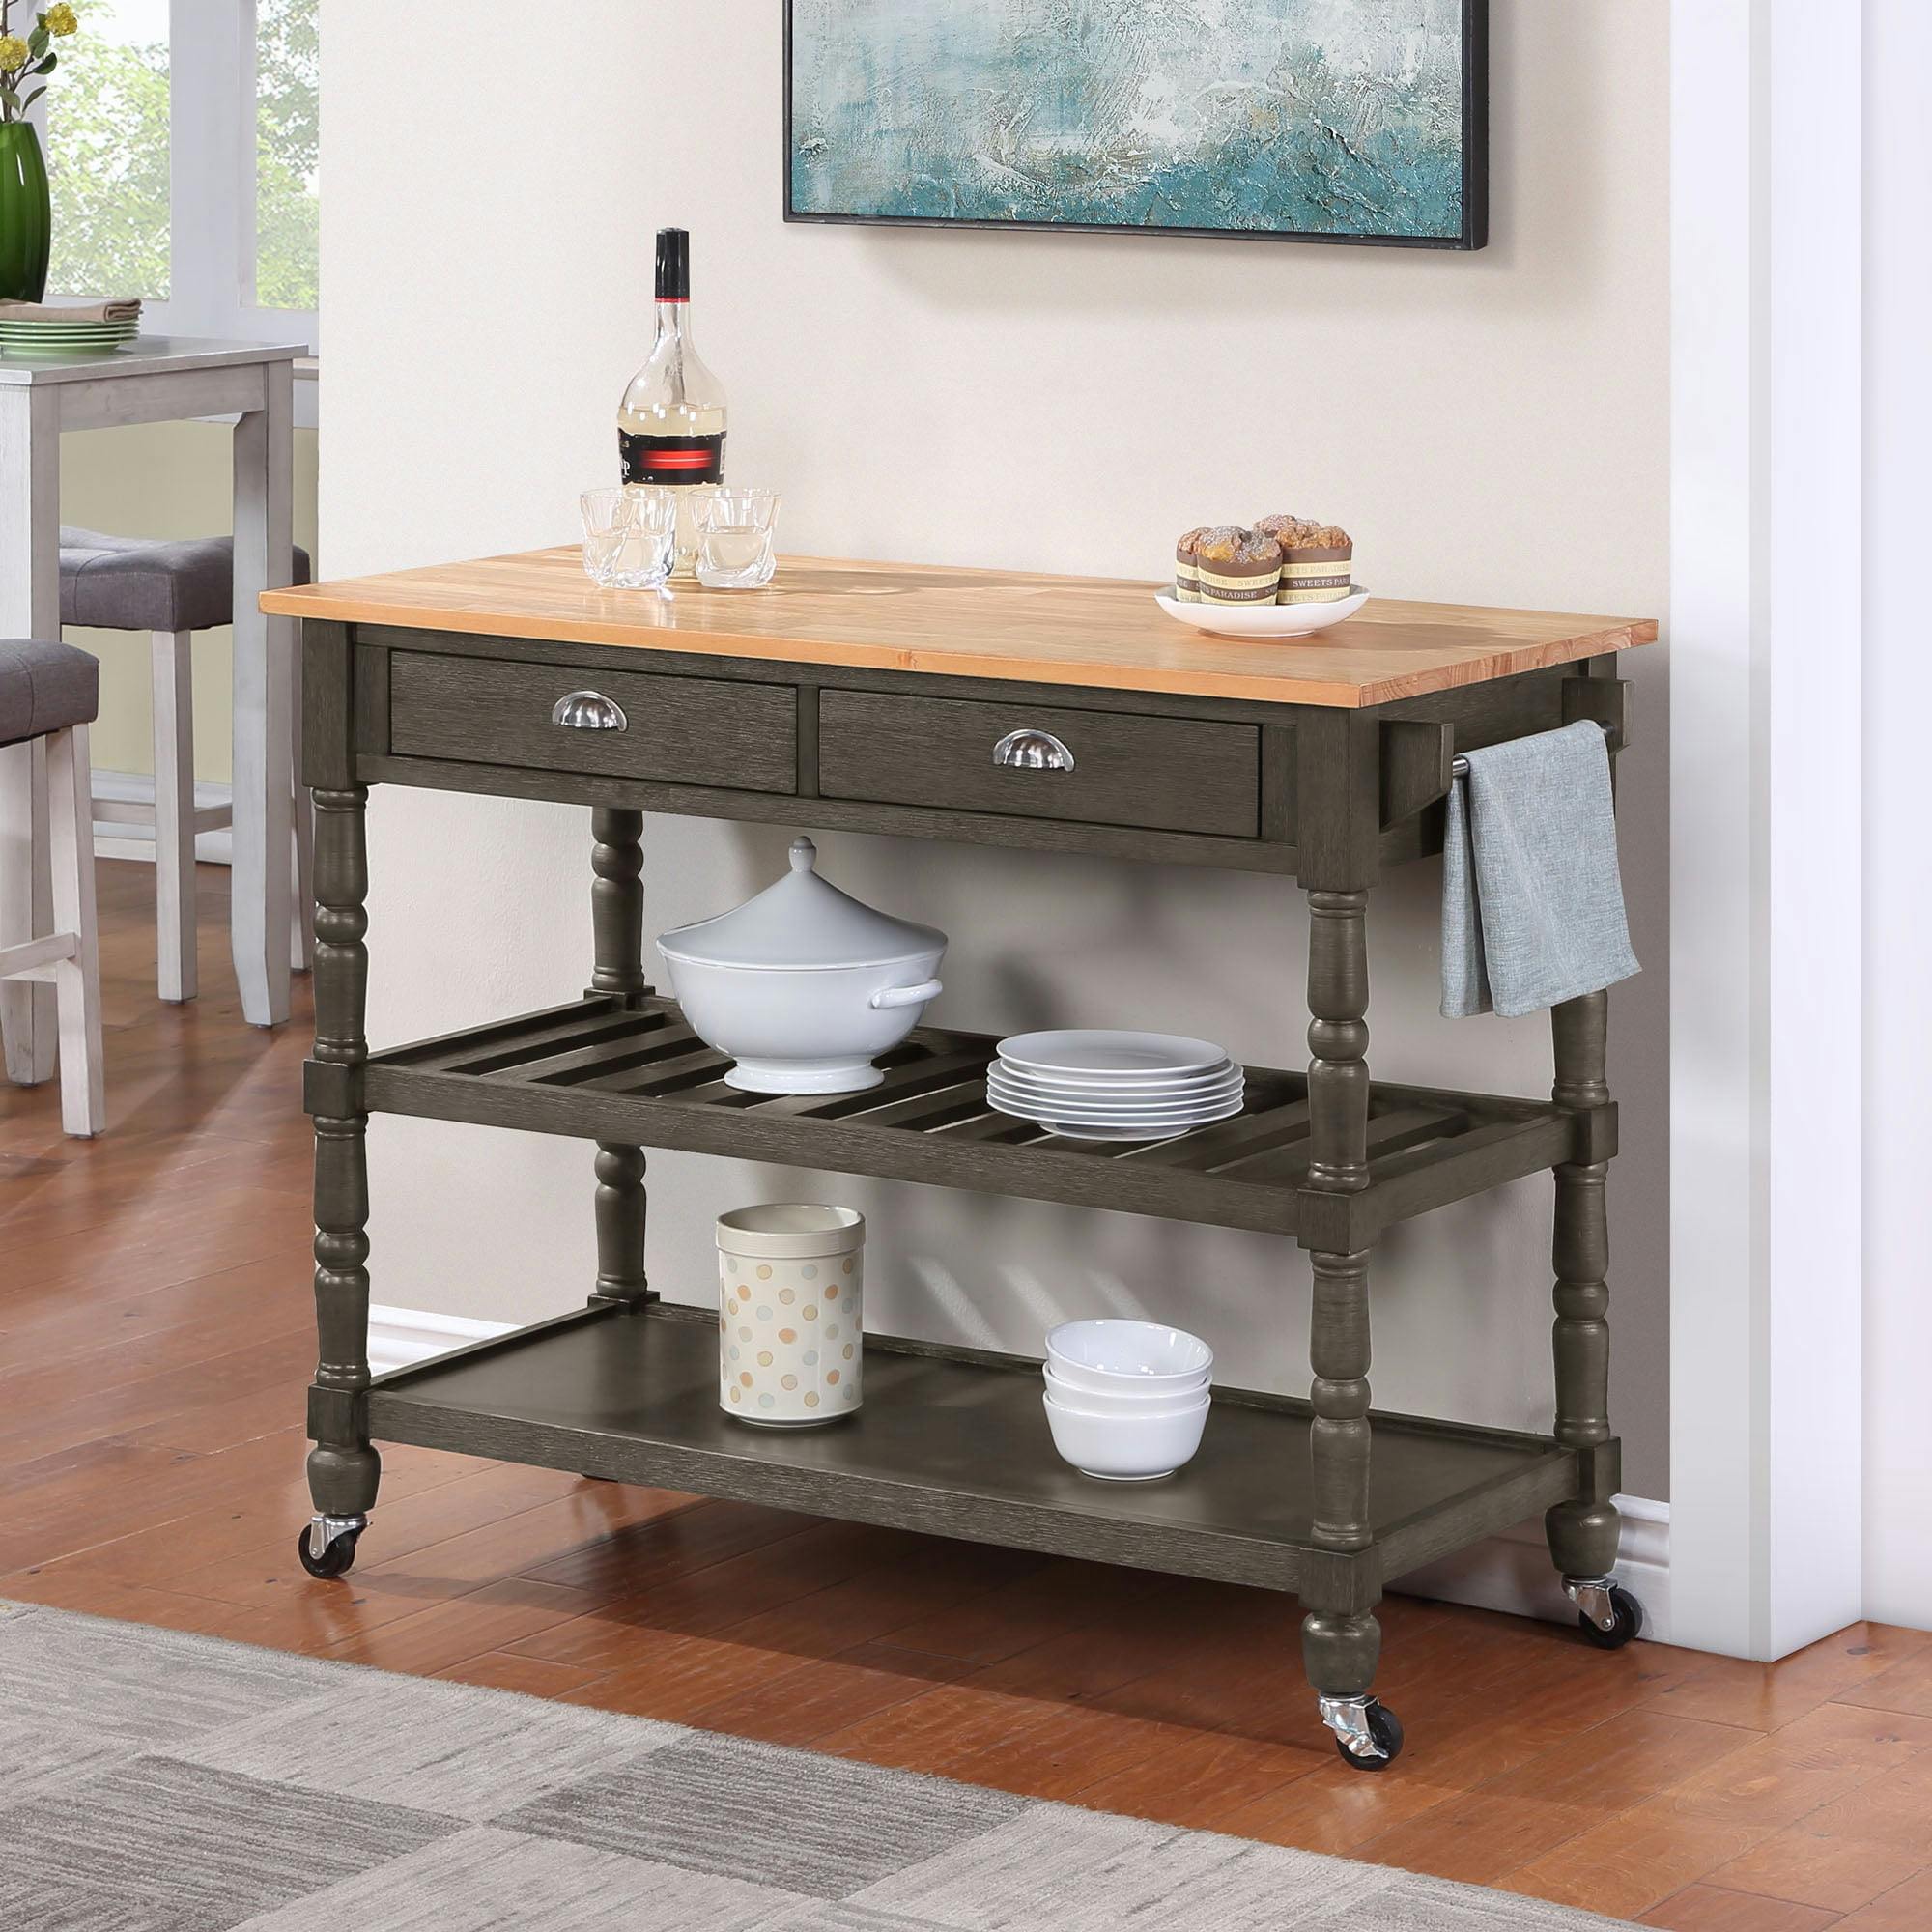 Classic Butcher Block Kitchen Cart with Wine Storage and Drawers